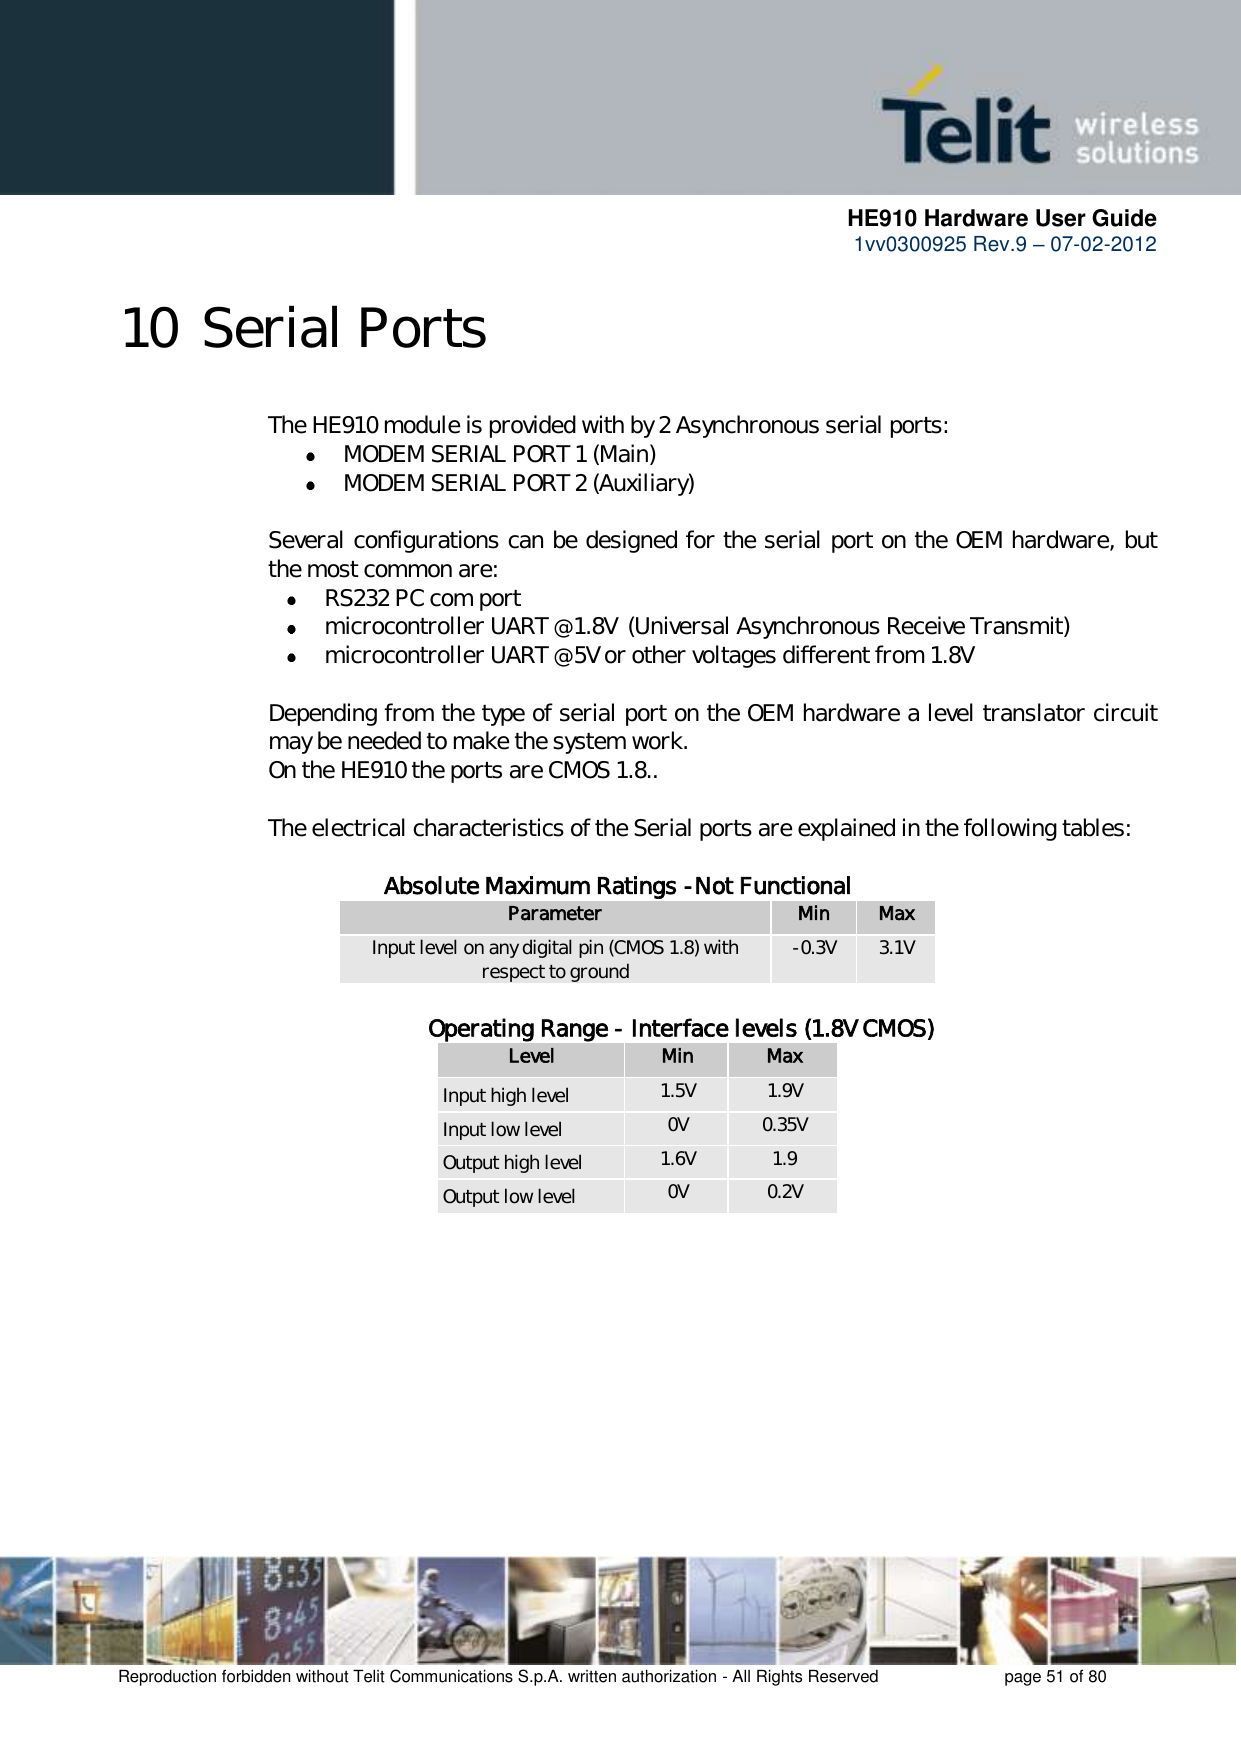      HE910 Hardware User Guide 1vv0300925 Rev.9 – 07-02-2012    Reproduction forbidden without Telit Communications S.p.A. written authorization - All Rights Reserved    page 51 of 80  10 Serial Ports The HE910 module is provided with by 2 Asynchronous serial ports:  MODEM SERIAL PORT 1 (Main)  MODEM SERIAL PORT 2 (Auxiliary)  Several configurations can be designed for the serial port on the OEM hardware, but the most common are:  RS232 PC com port  microcontroller UART @ 1.8V  (Universal Asynchronous Receive Transmit)   microcontroller UART @ 5V or other voltages different from 1.8V   Depending from the type of serial port on the OEM hardware a level translator circuit may be needed to make the system work.  On the HE910 the ports are CMOS 1.8..   The electrical characteristics of the Serial ports are explained in the following tables:      Absolute Maximum Ratings -Not Functional Parameter Min Max Input level on any digital pin (CMOS 1.8) with respect to ground -0.3V 3.1V              Operating Range - Interface levels (1.8V CMOS) Level Min Max Input high level 1.5V 1.9V Input low level 0V 0.35V Output high level 1.6V 1.9 Output low level 0V 0.2V       